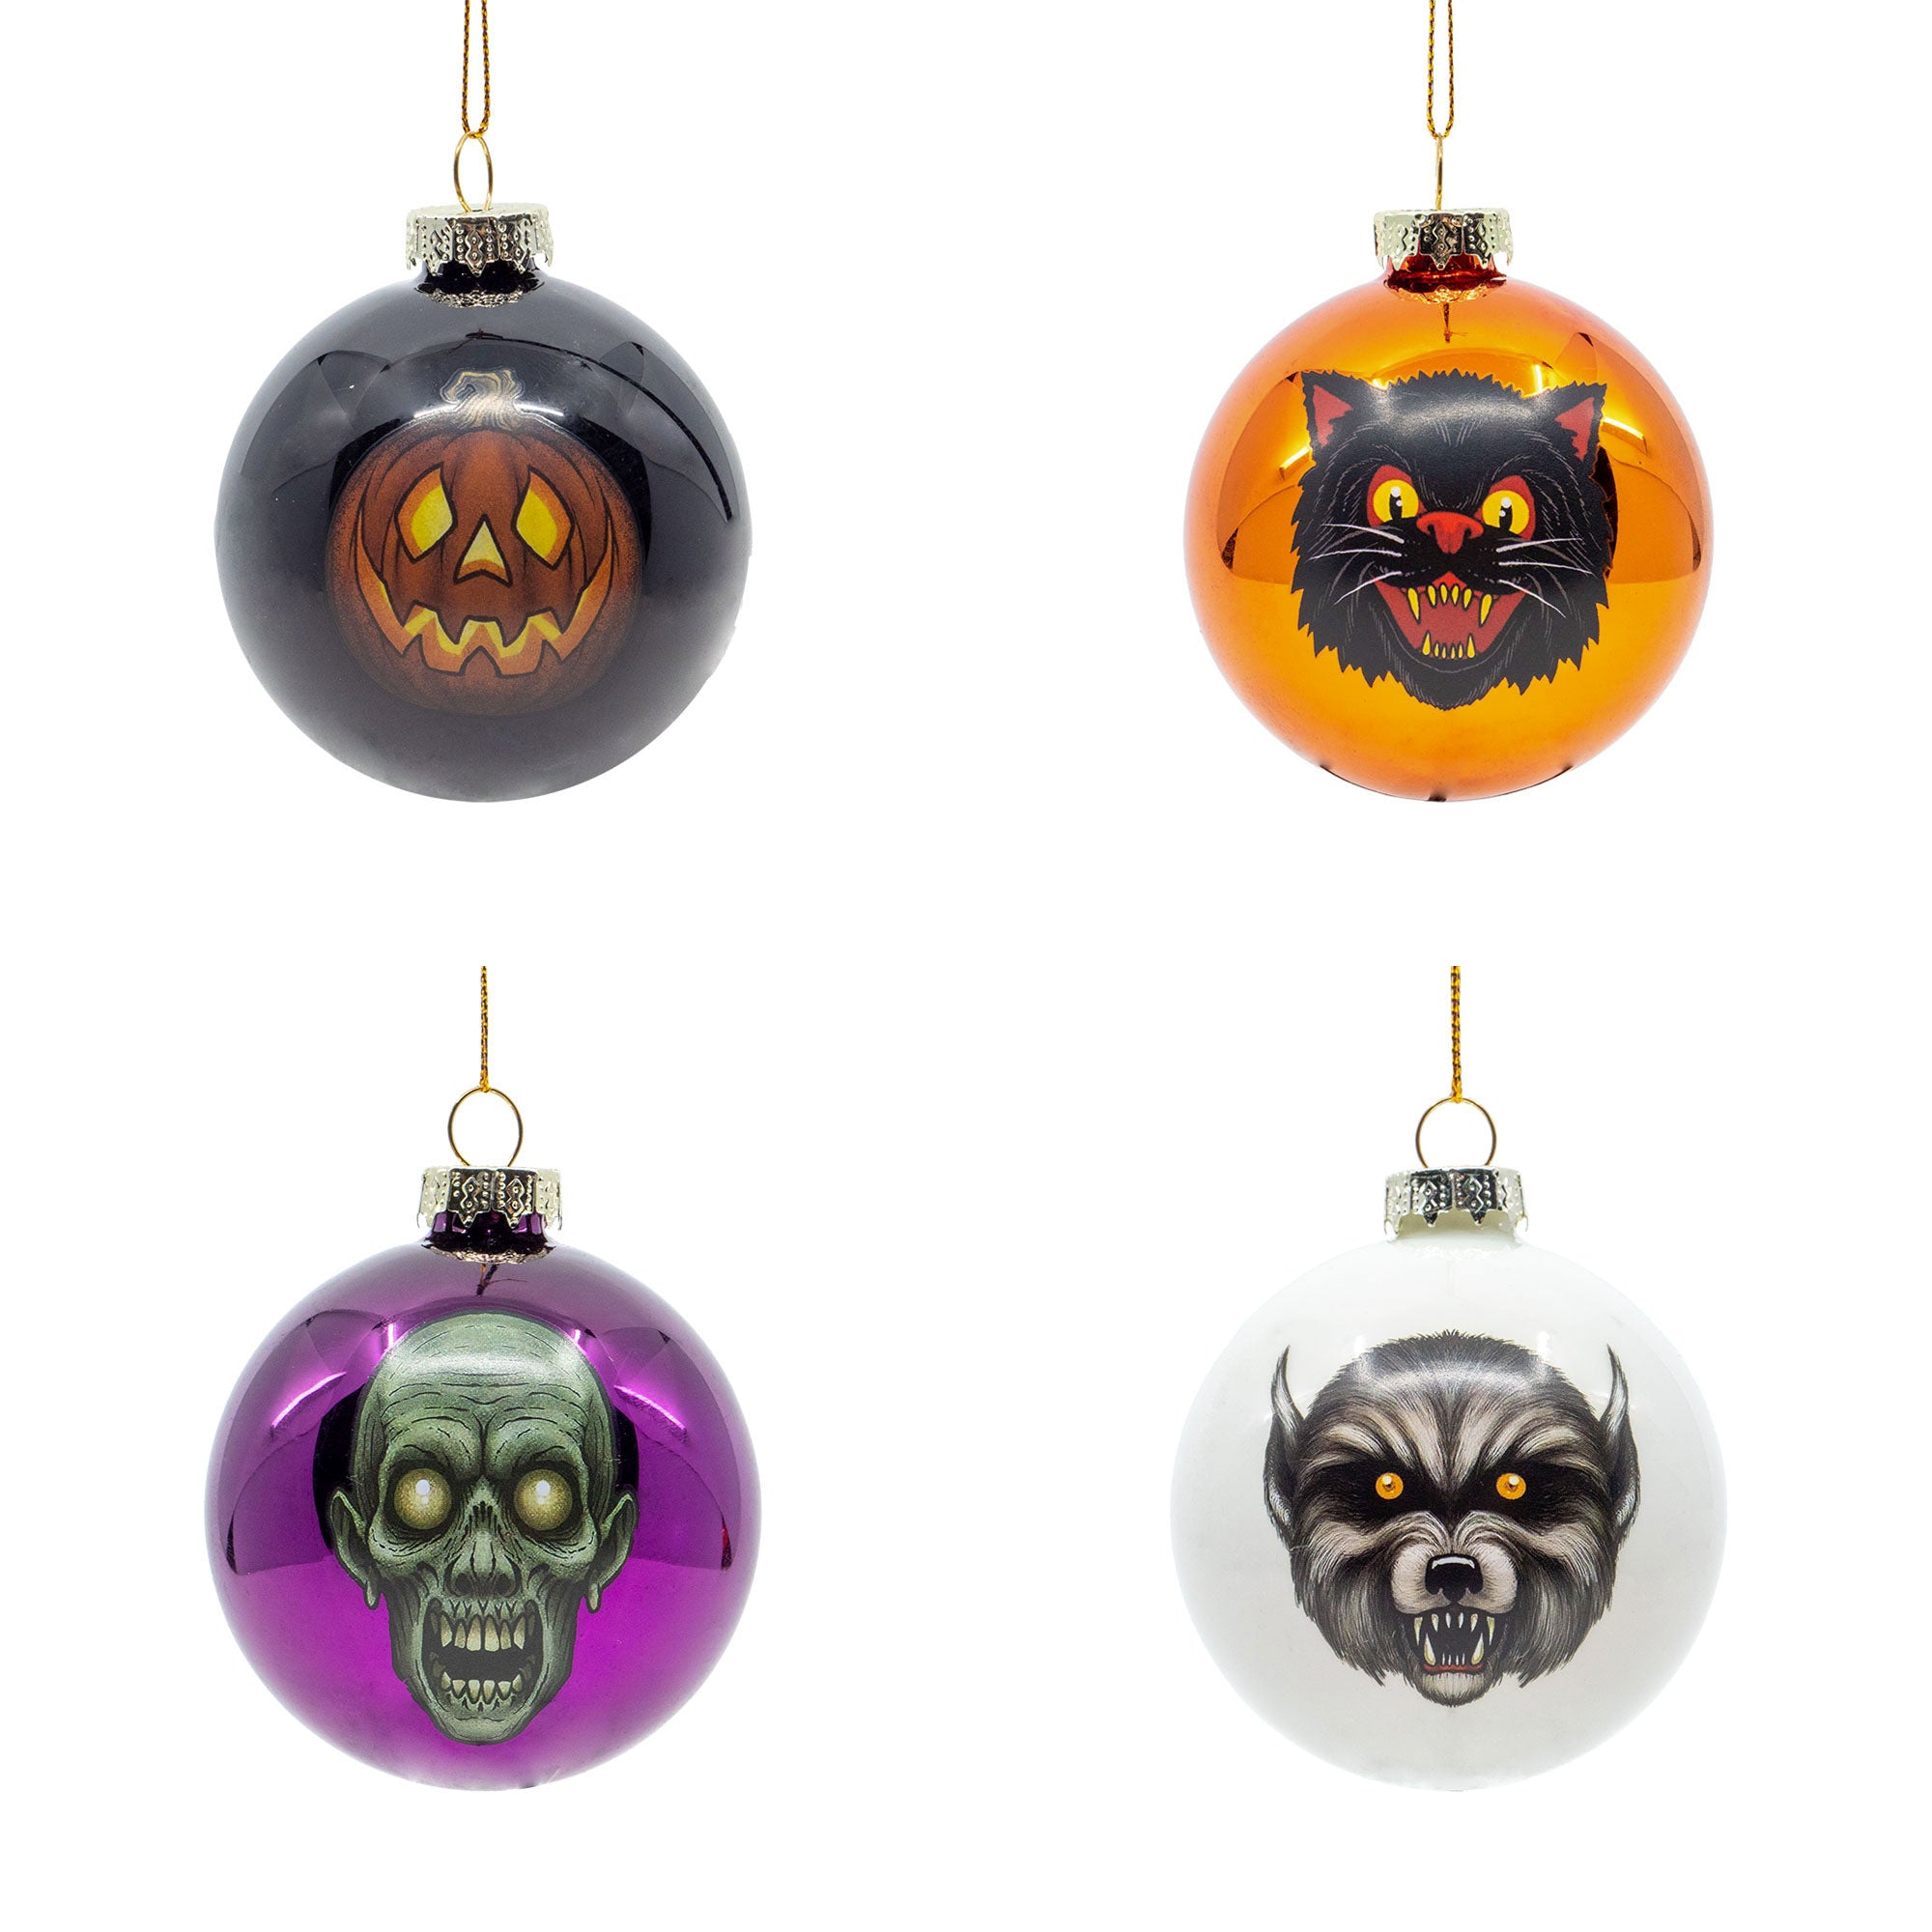 Ghoulish Glass Ornaments 4 Pack